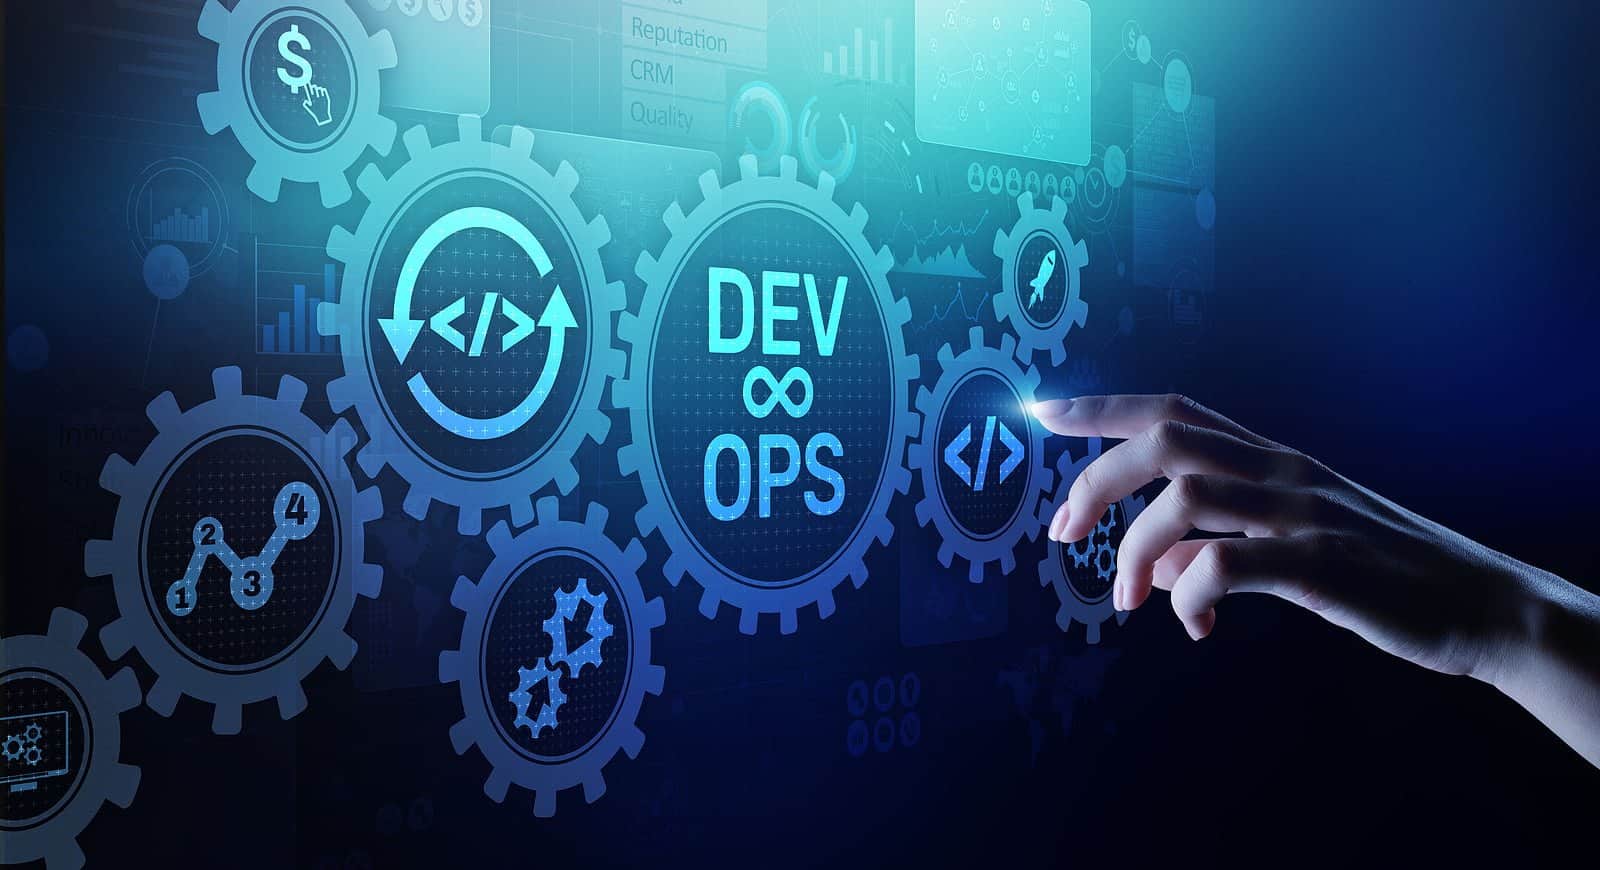 Frequently Asked Questions (FAQs) On DevOps